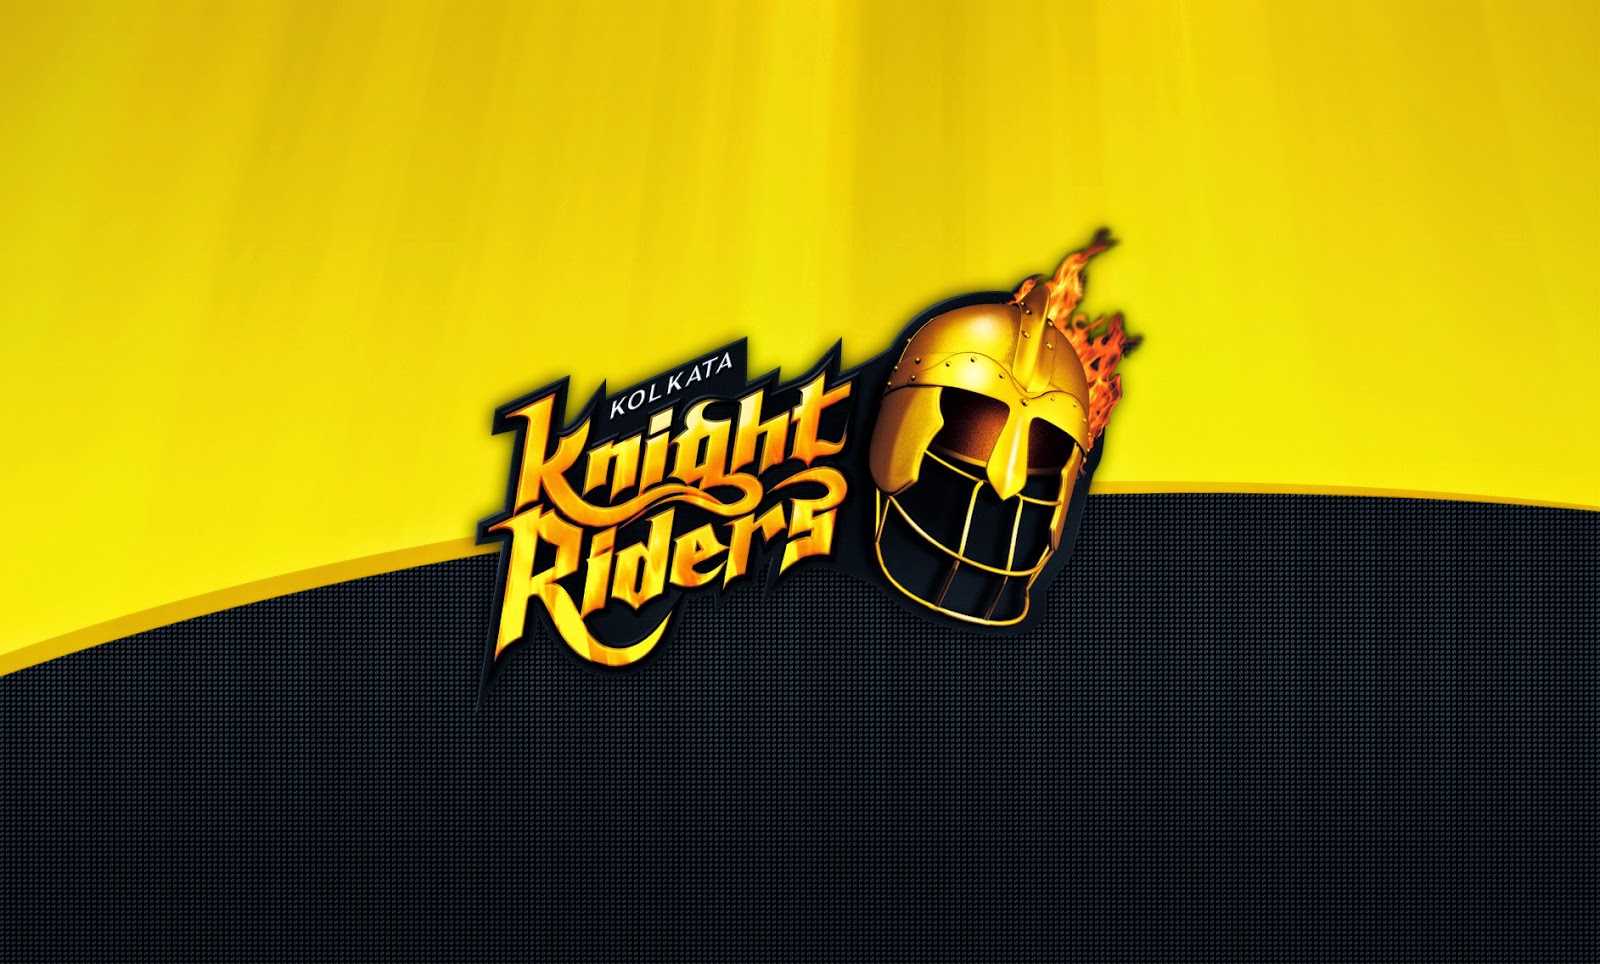 So It Was Little And Detailed Information About Kolkata - Kolkata Knight Riders , HD Wallpaper & Backgrounds